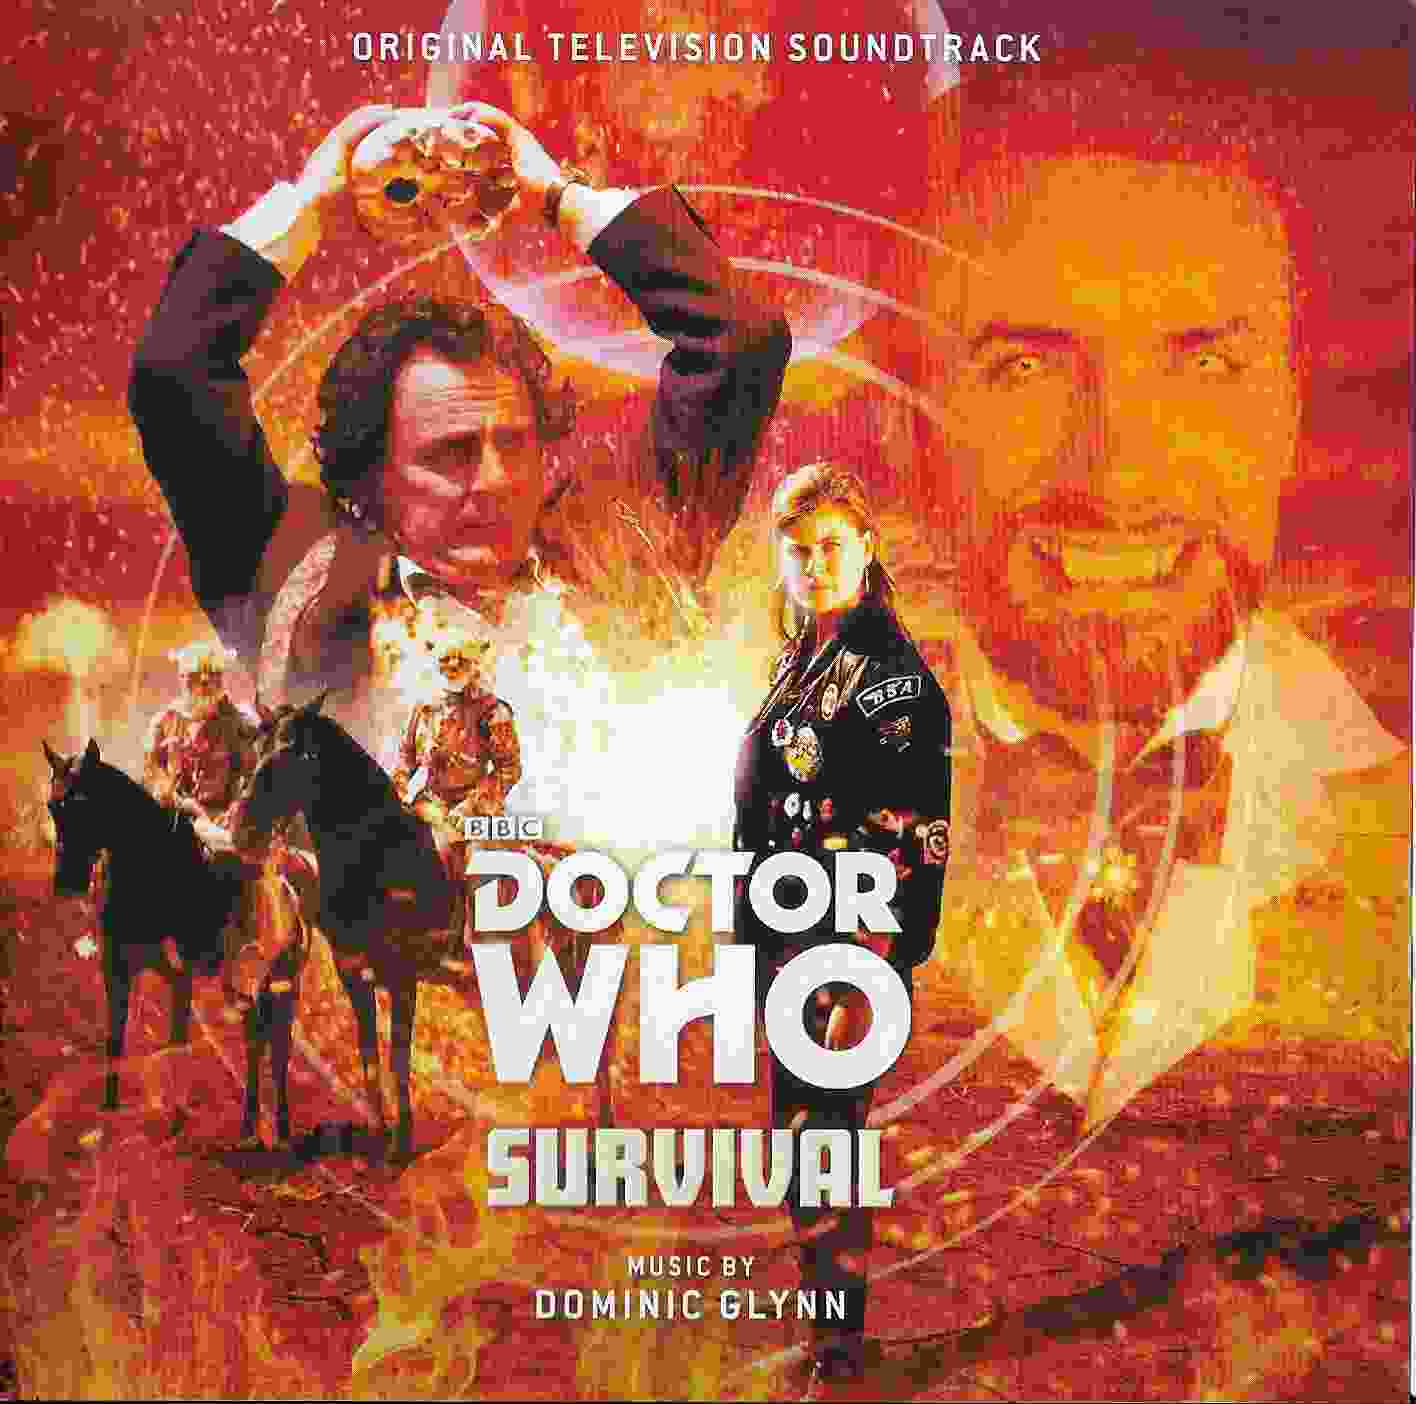 Picture of Doctor Who - Survival by artist Dominic Glynn from the BBC cds - Records and Tapes library